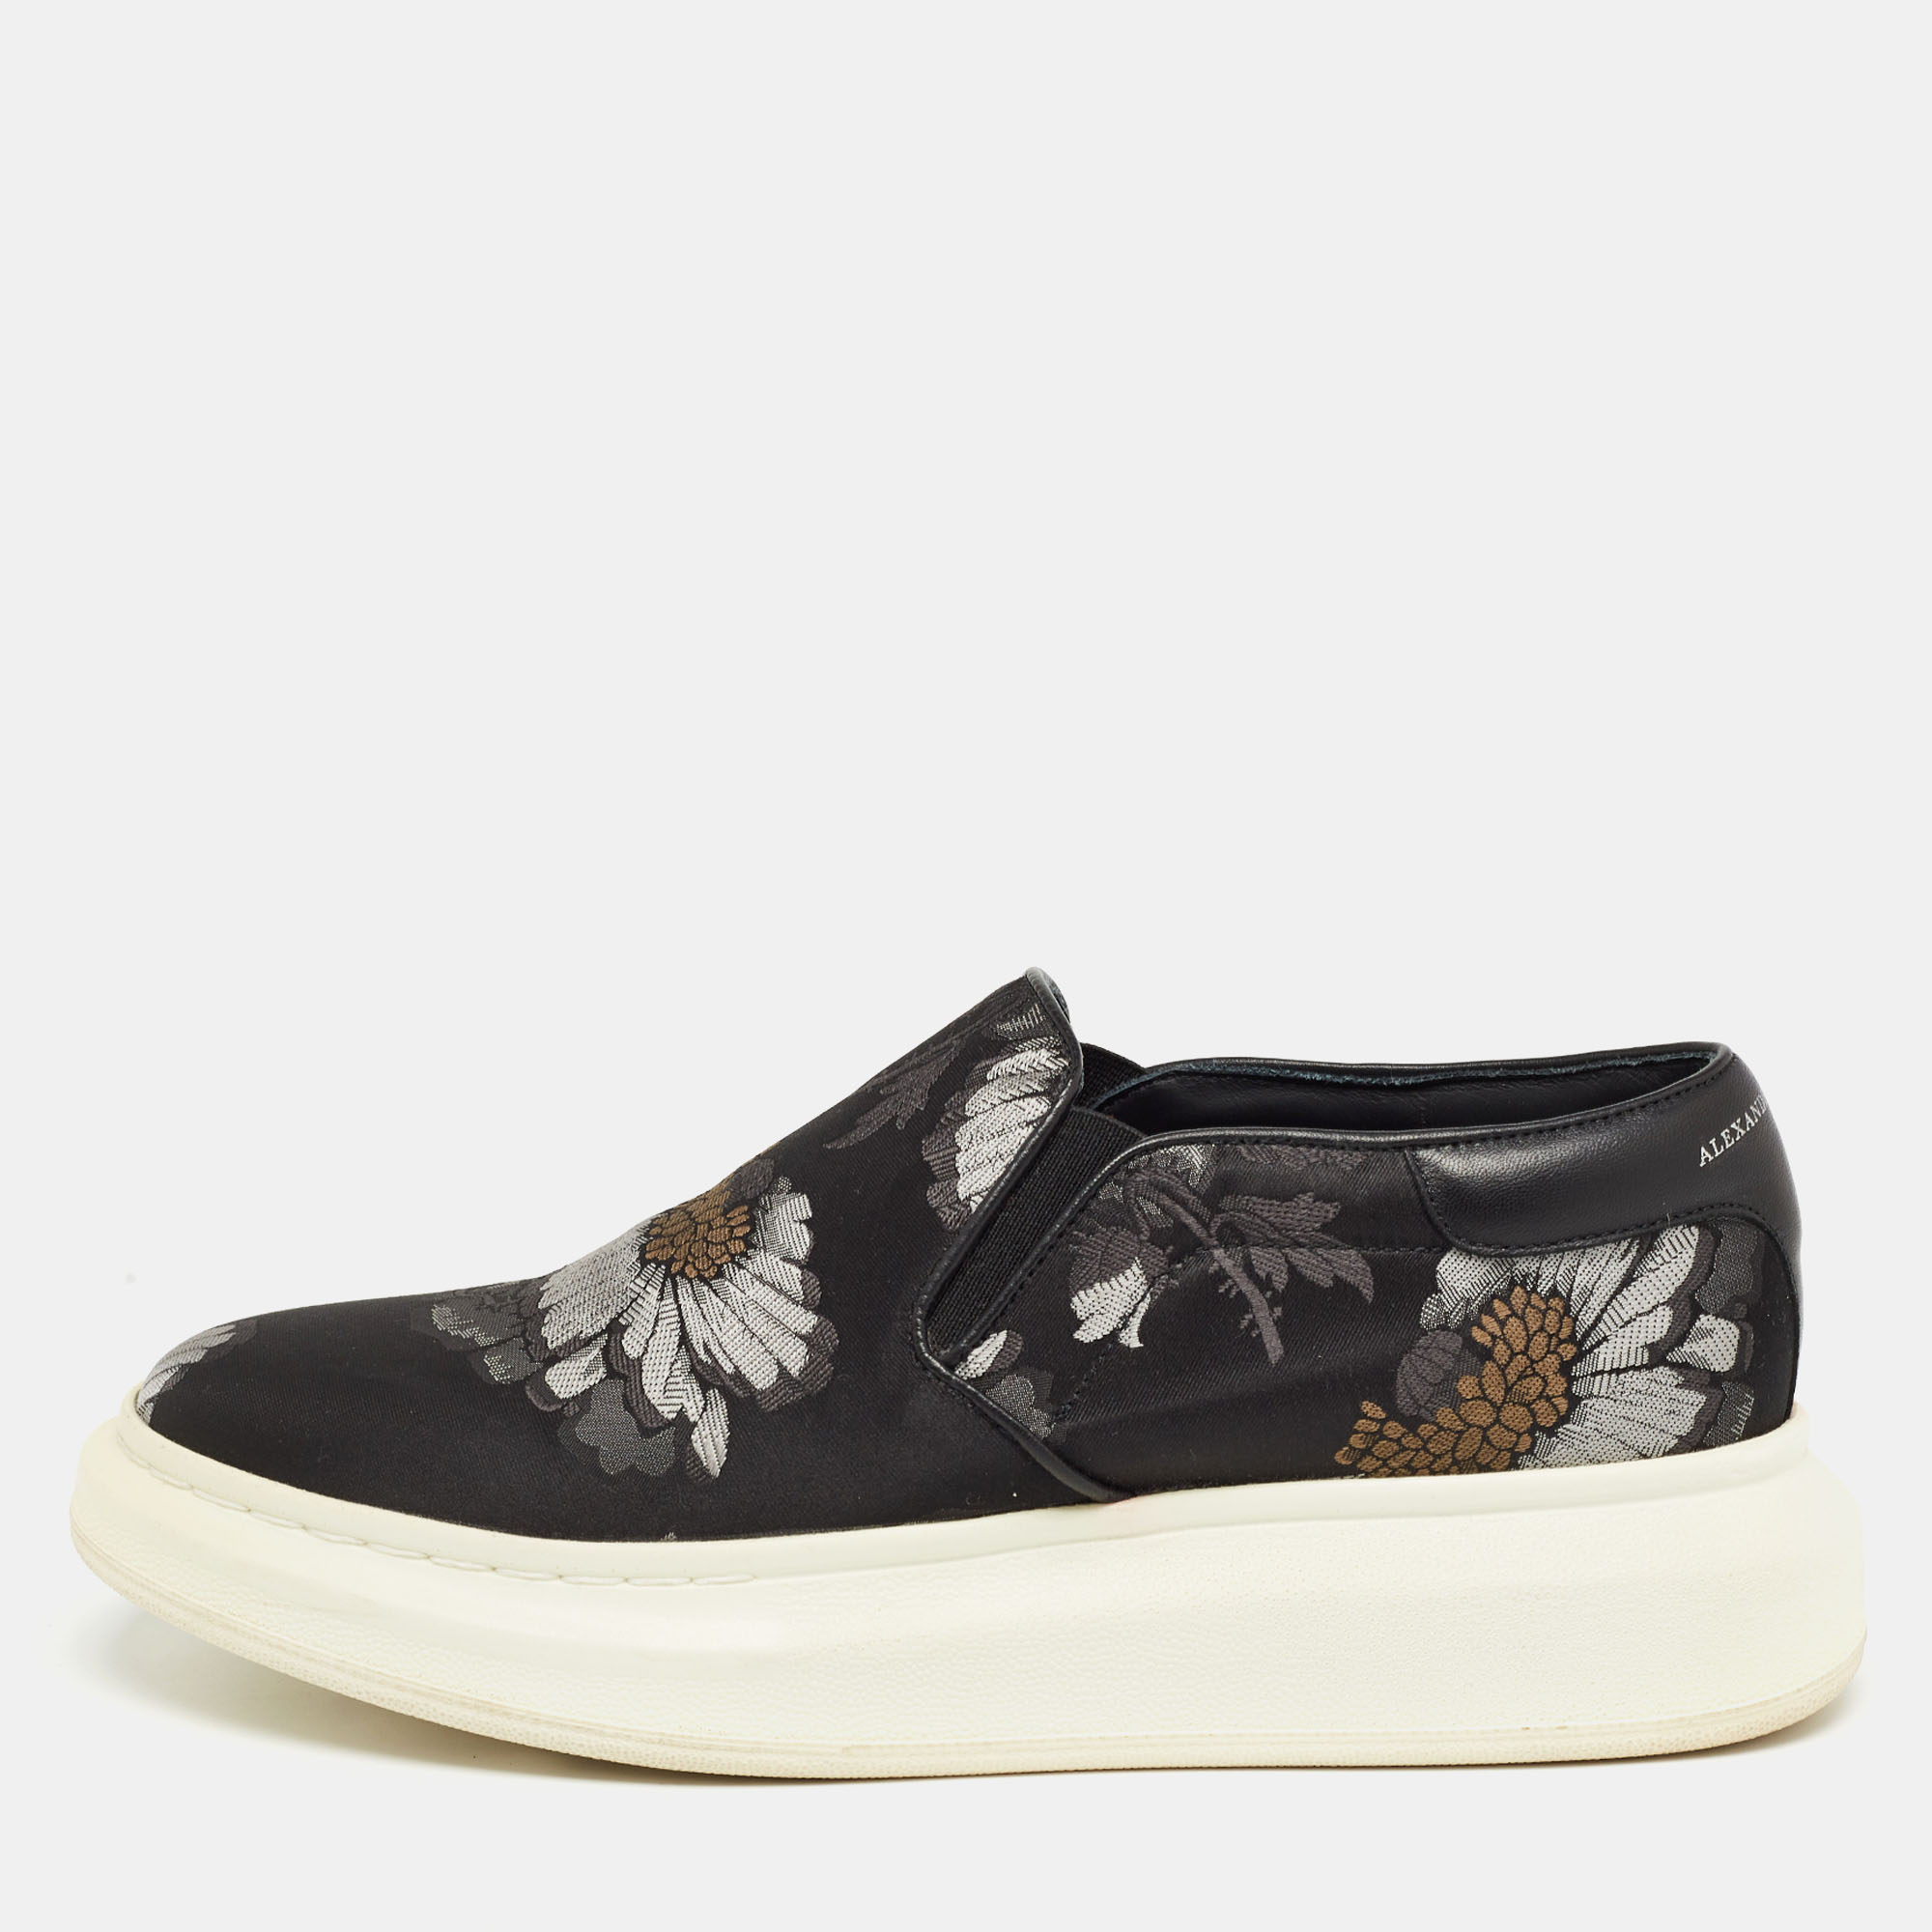 Pre-owned Alexander Mcqueen Black Floral Brocade Fabric Slip On Sneakers Size 40